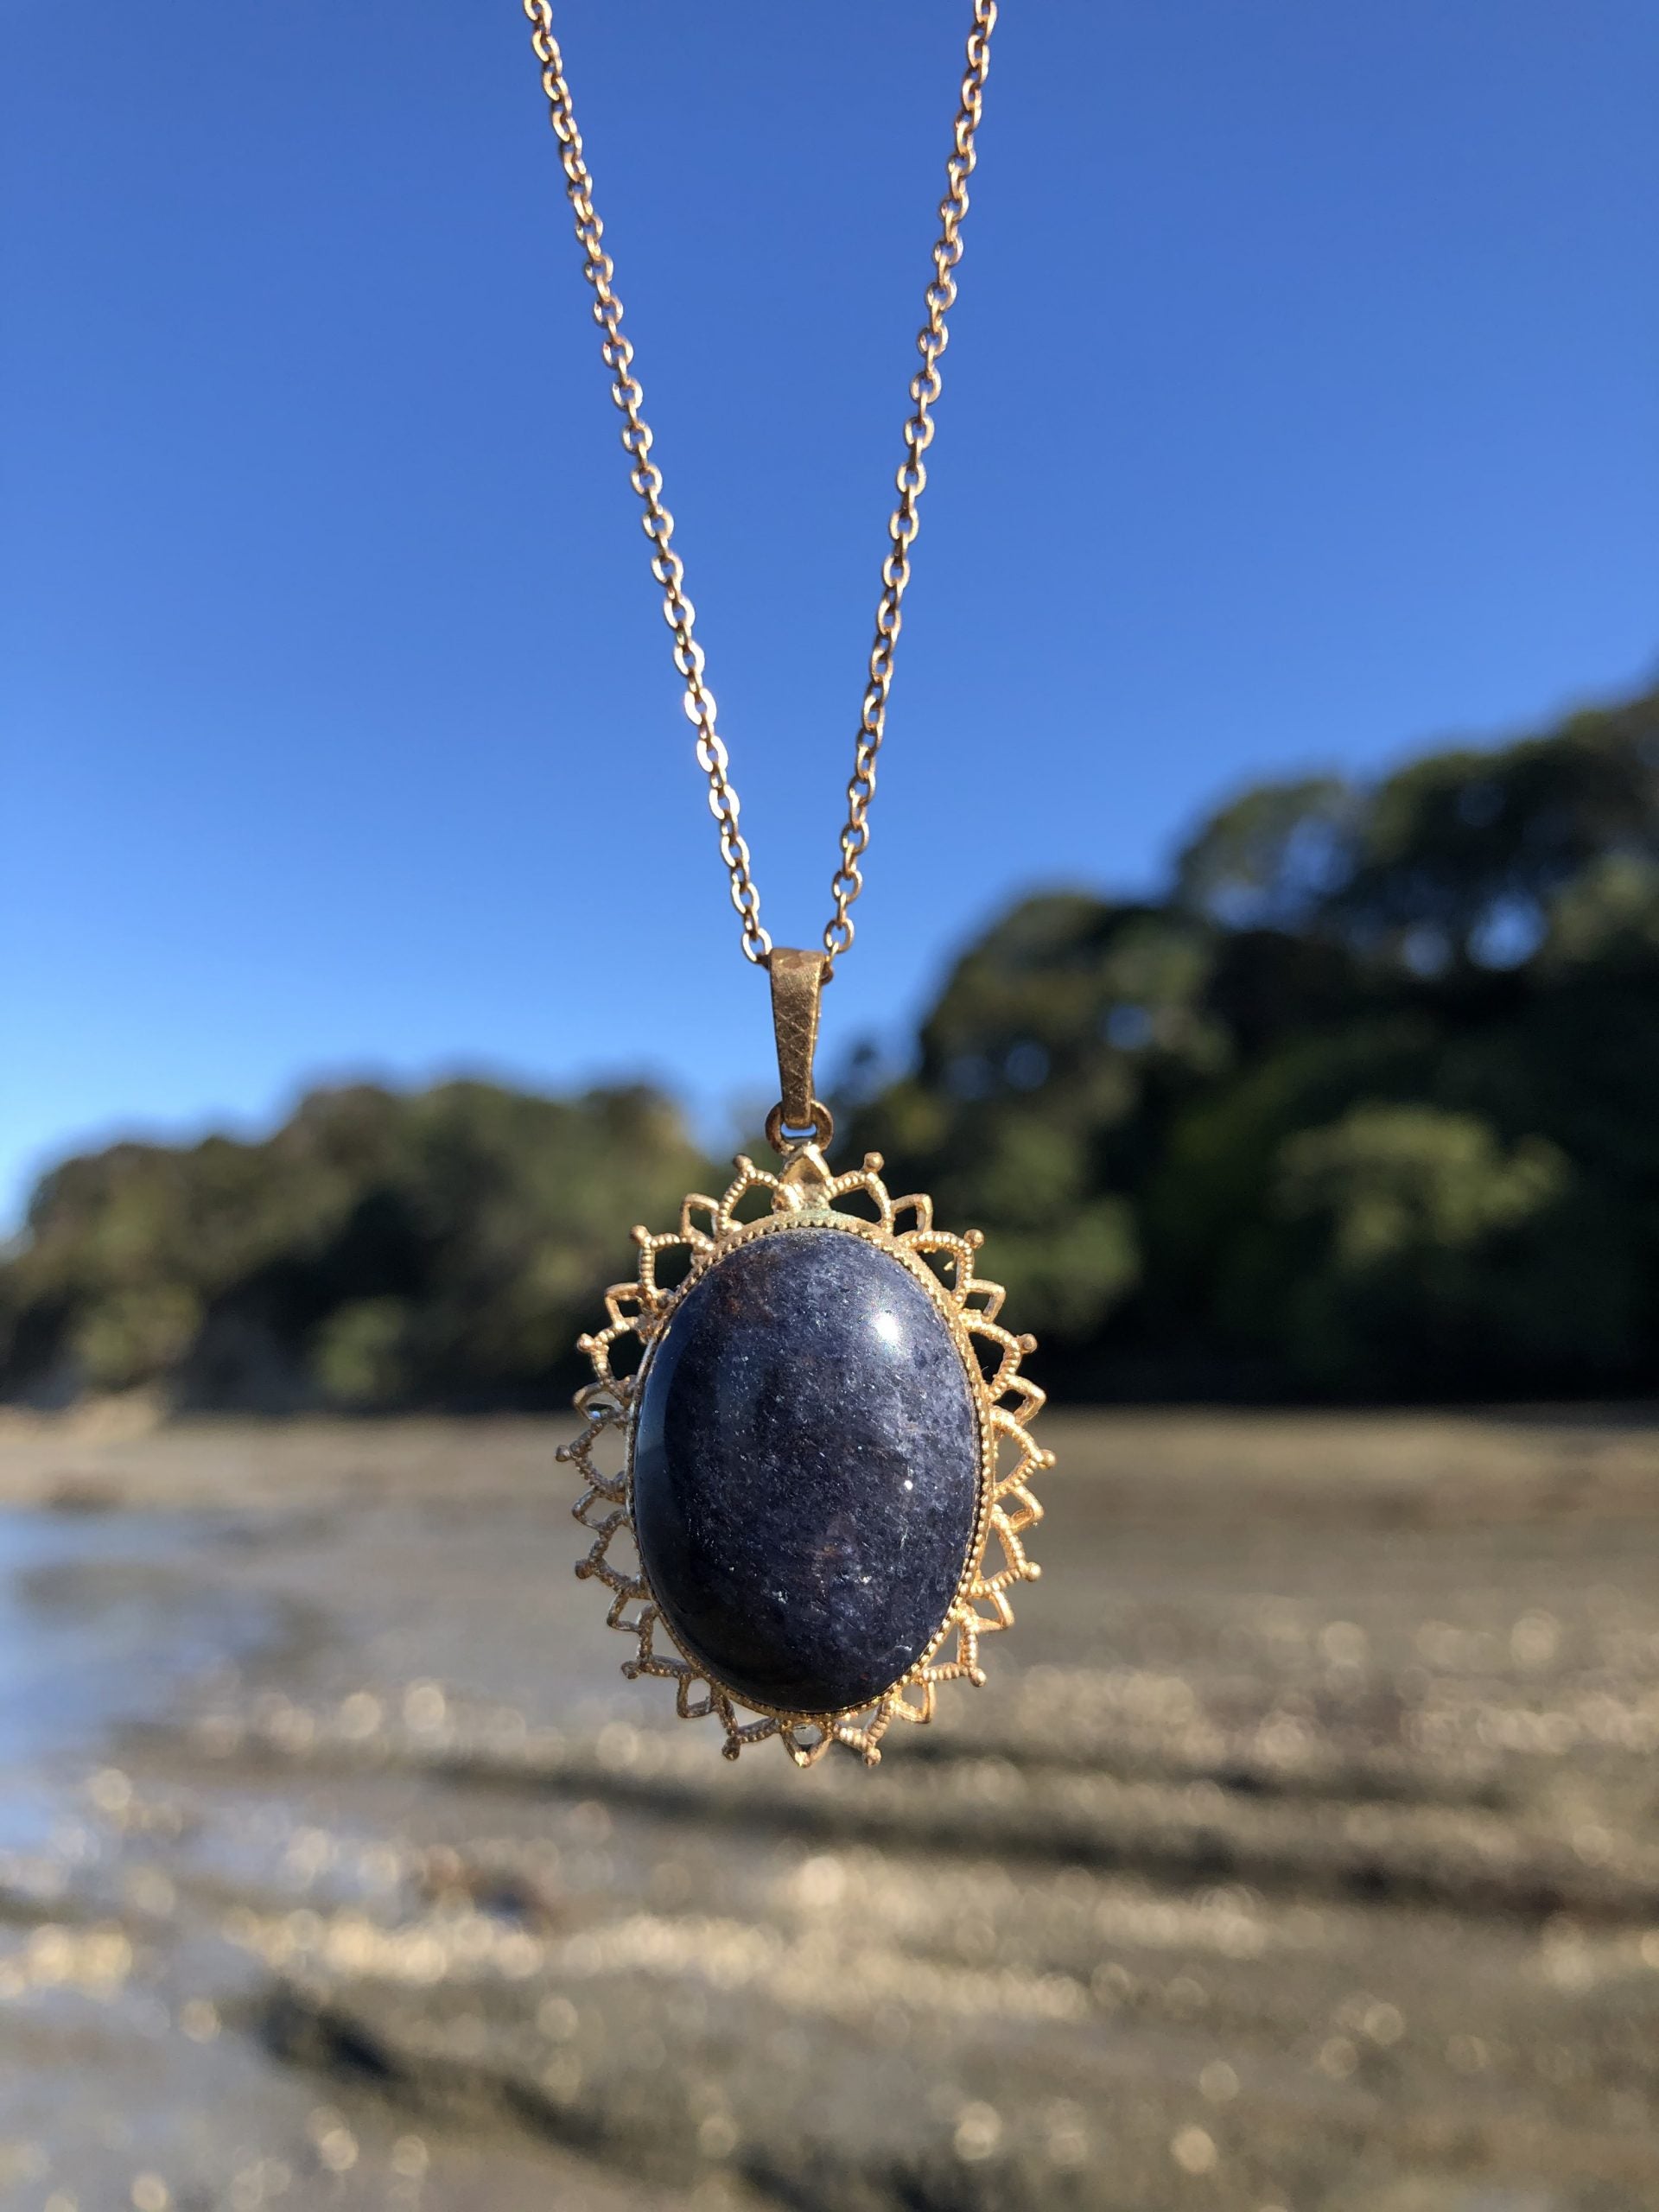 Necklace with natural blue aventurine, hand polished to a 25x18mm cabochon and set in a gold plated setting with 19 inch chain, on beach